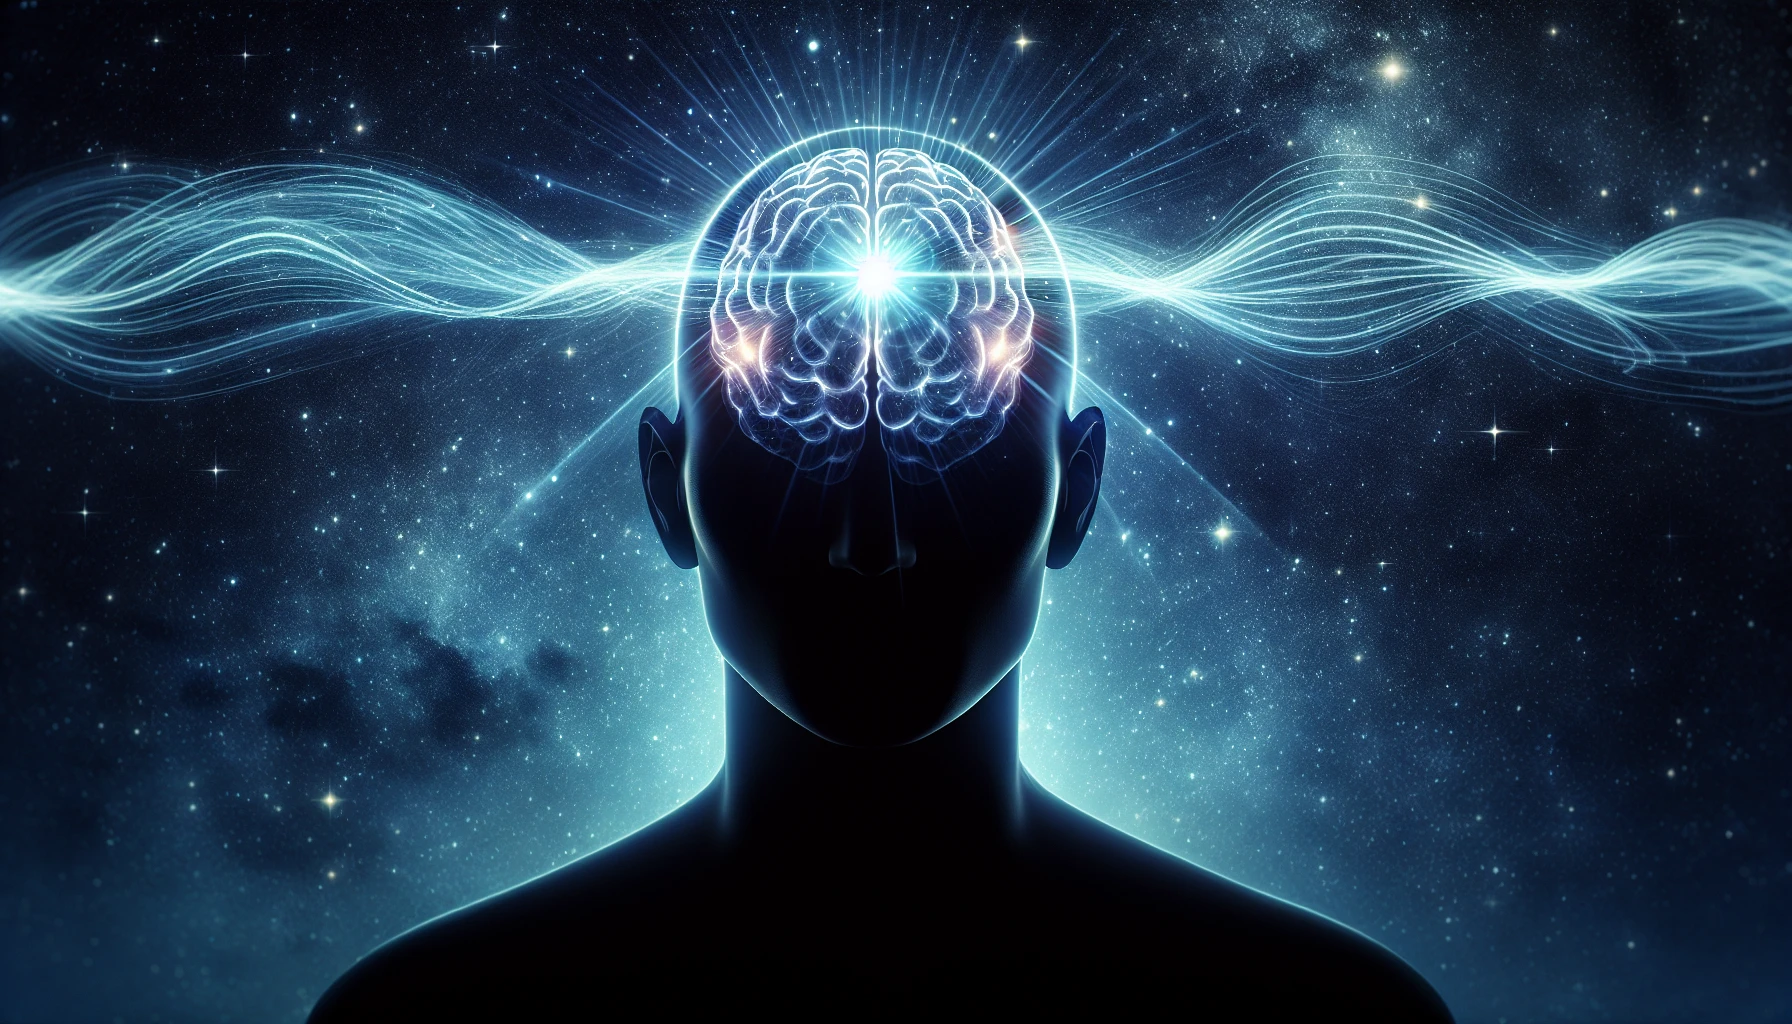 Illustration of a person with glowing brain showcasing telepathy